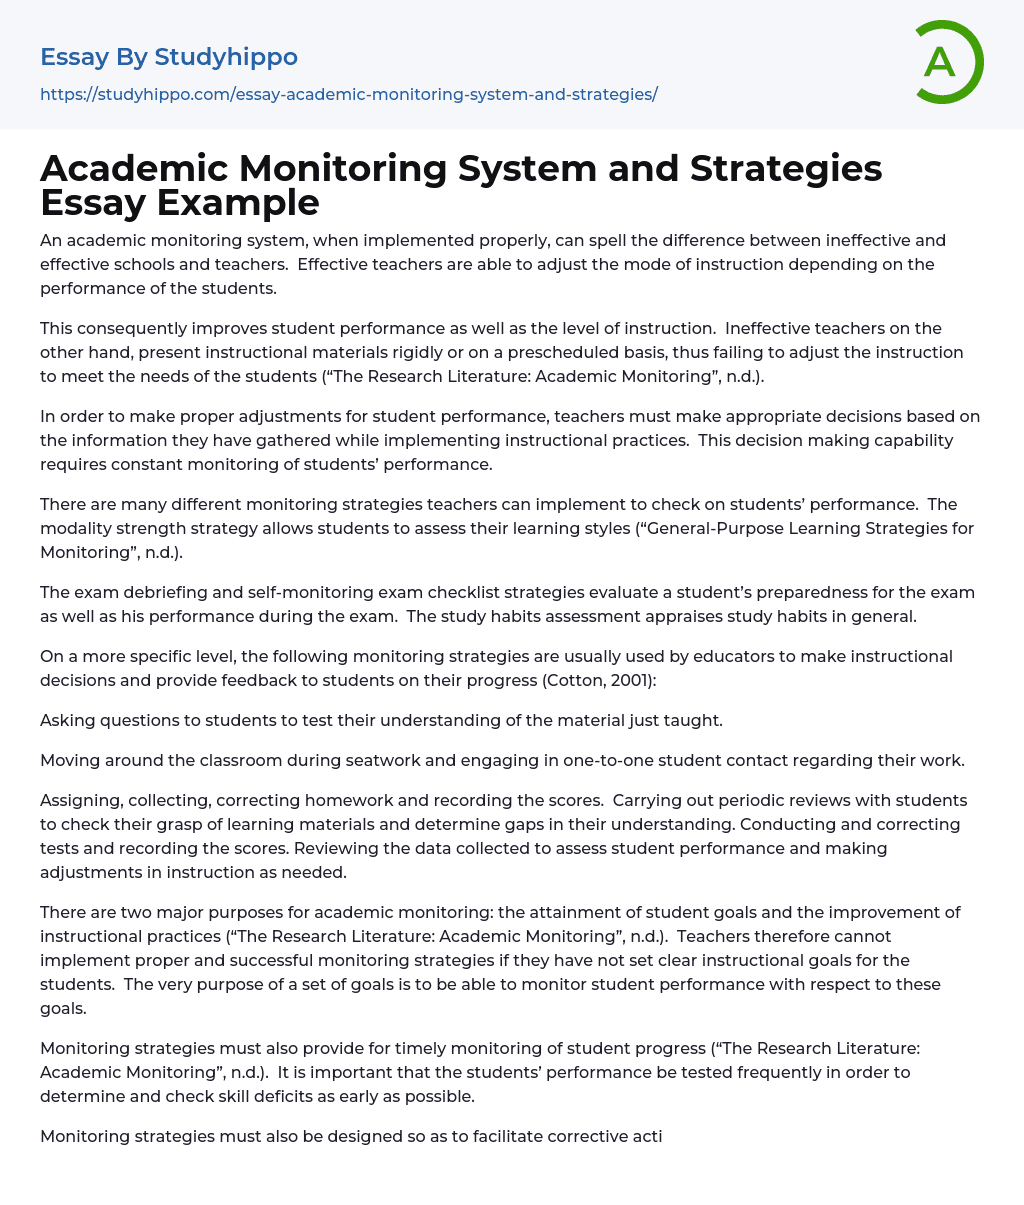 Academic Monitoring System and Strategies Essay Example